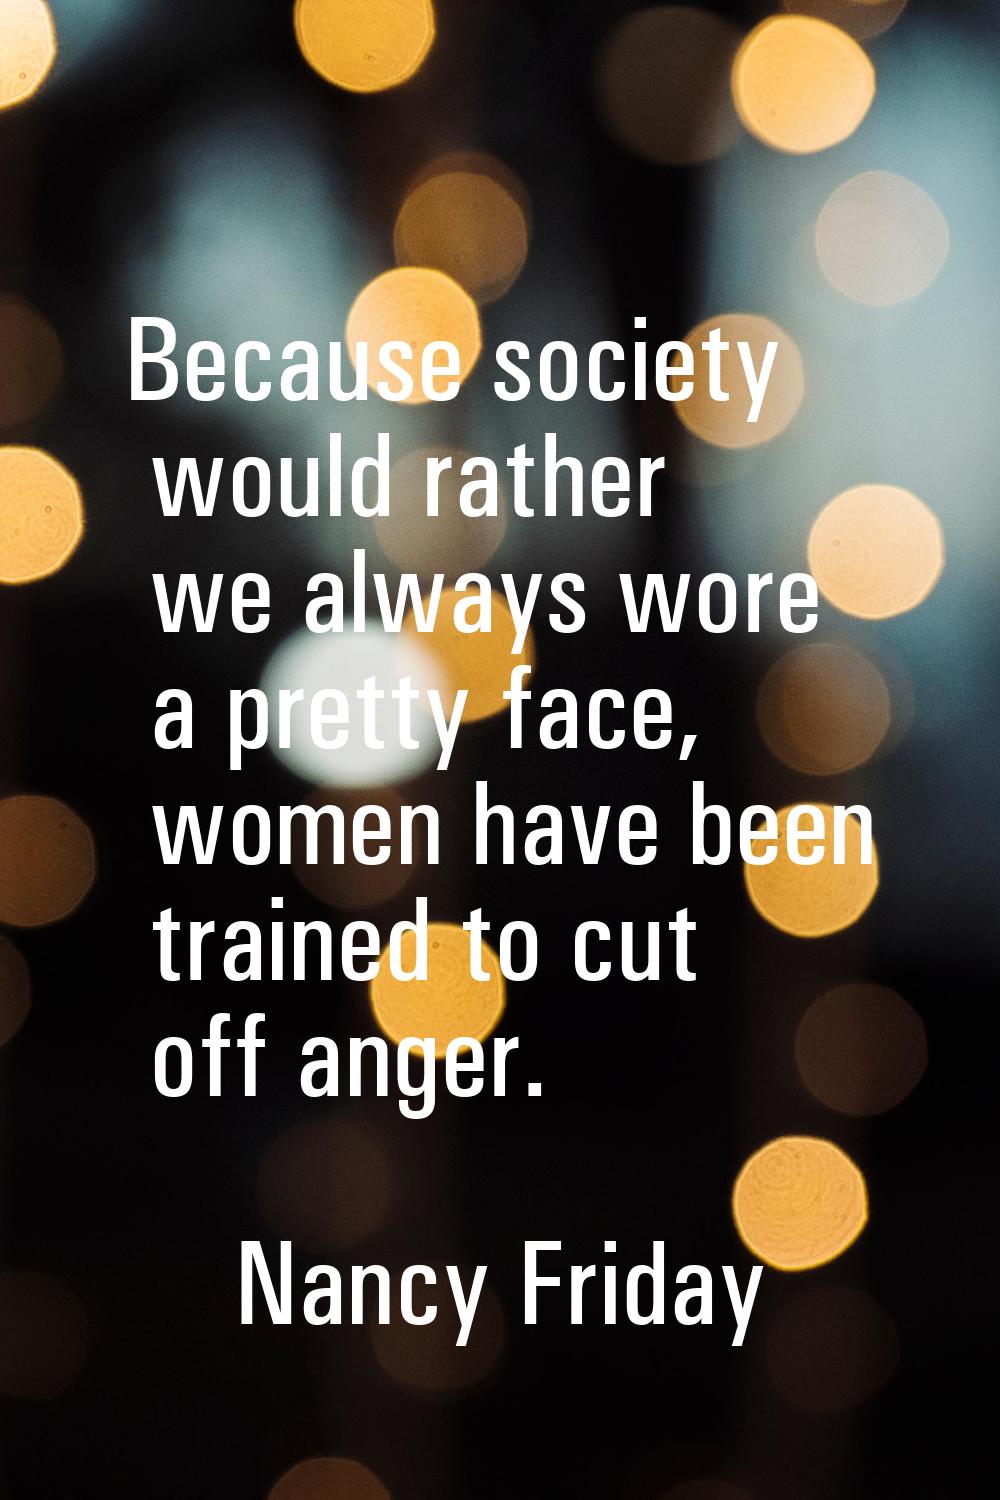 Because society would rather we always wore a pretty face, women have been trained to cut off anger